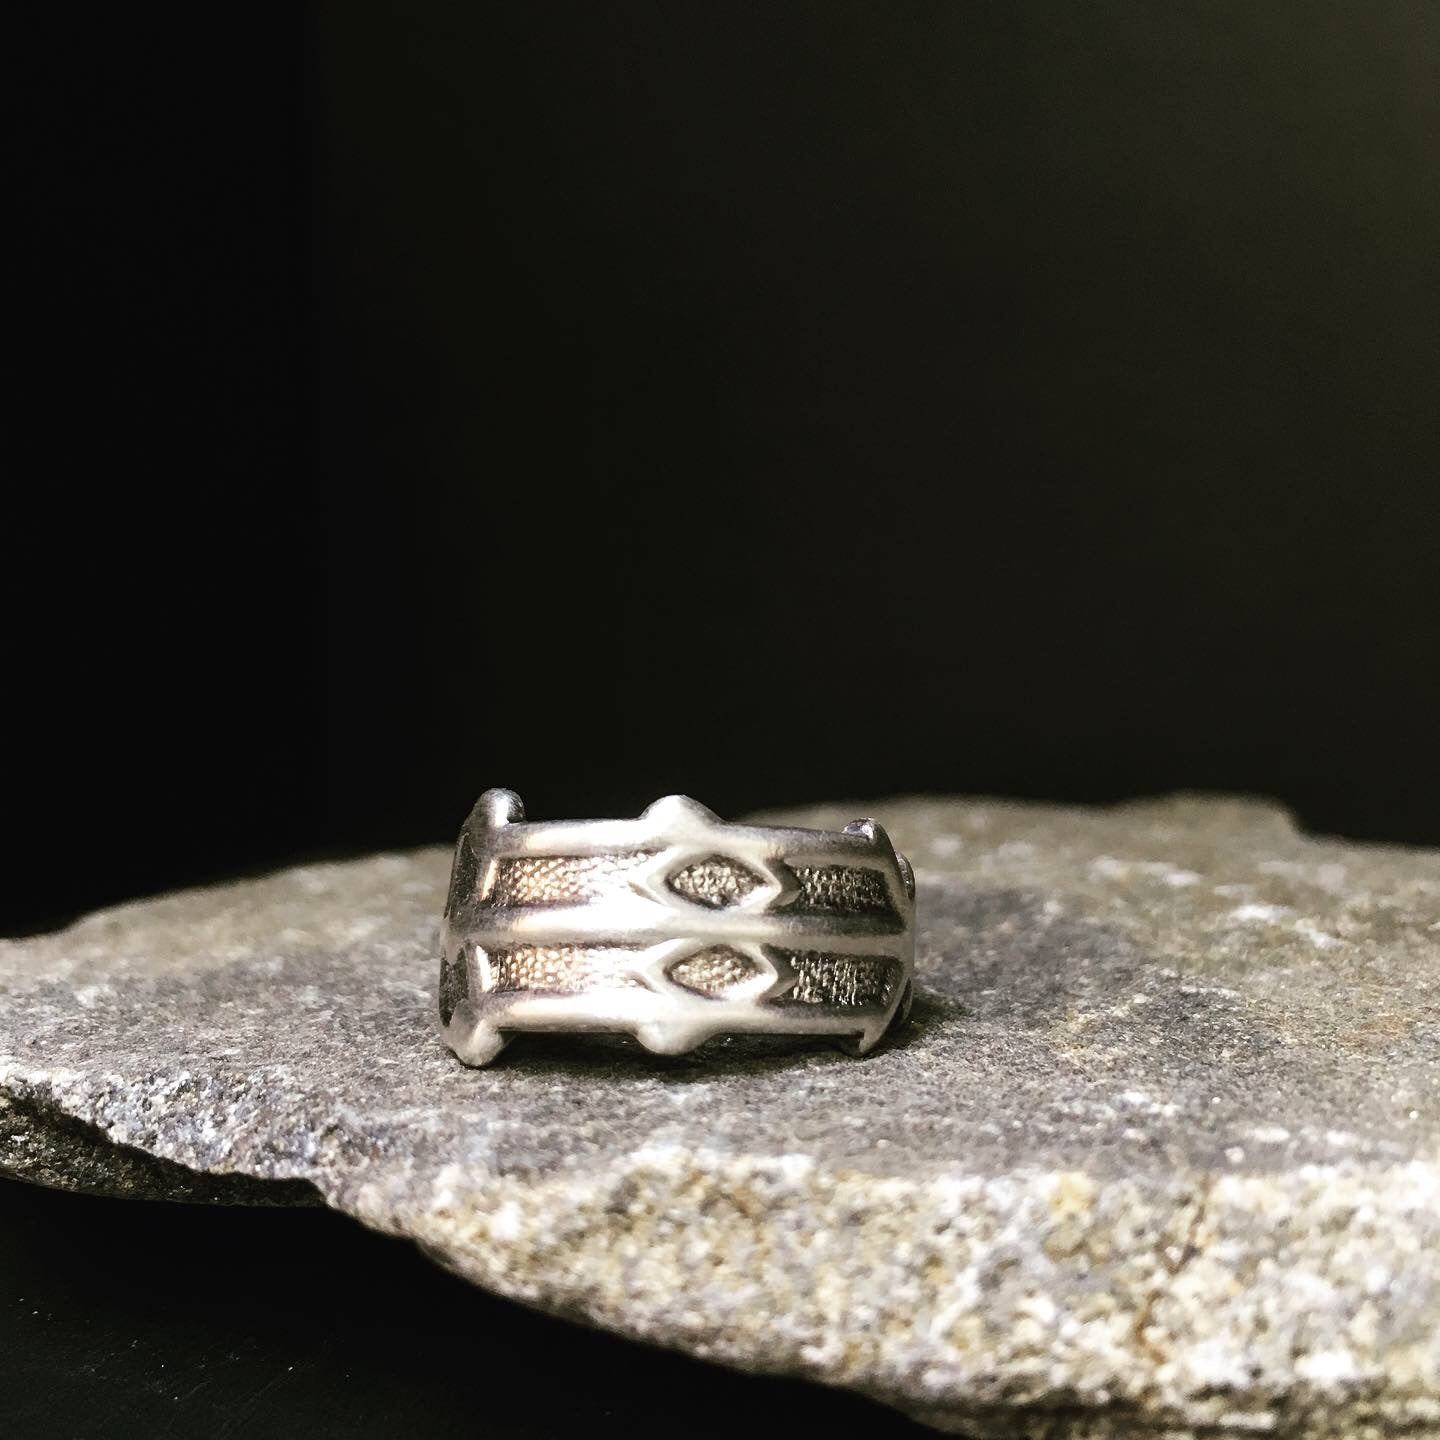 Vintage spoon ring handcrafted